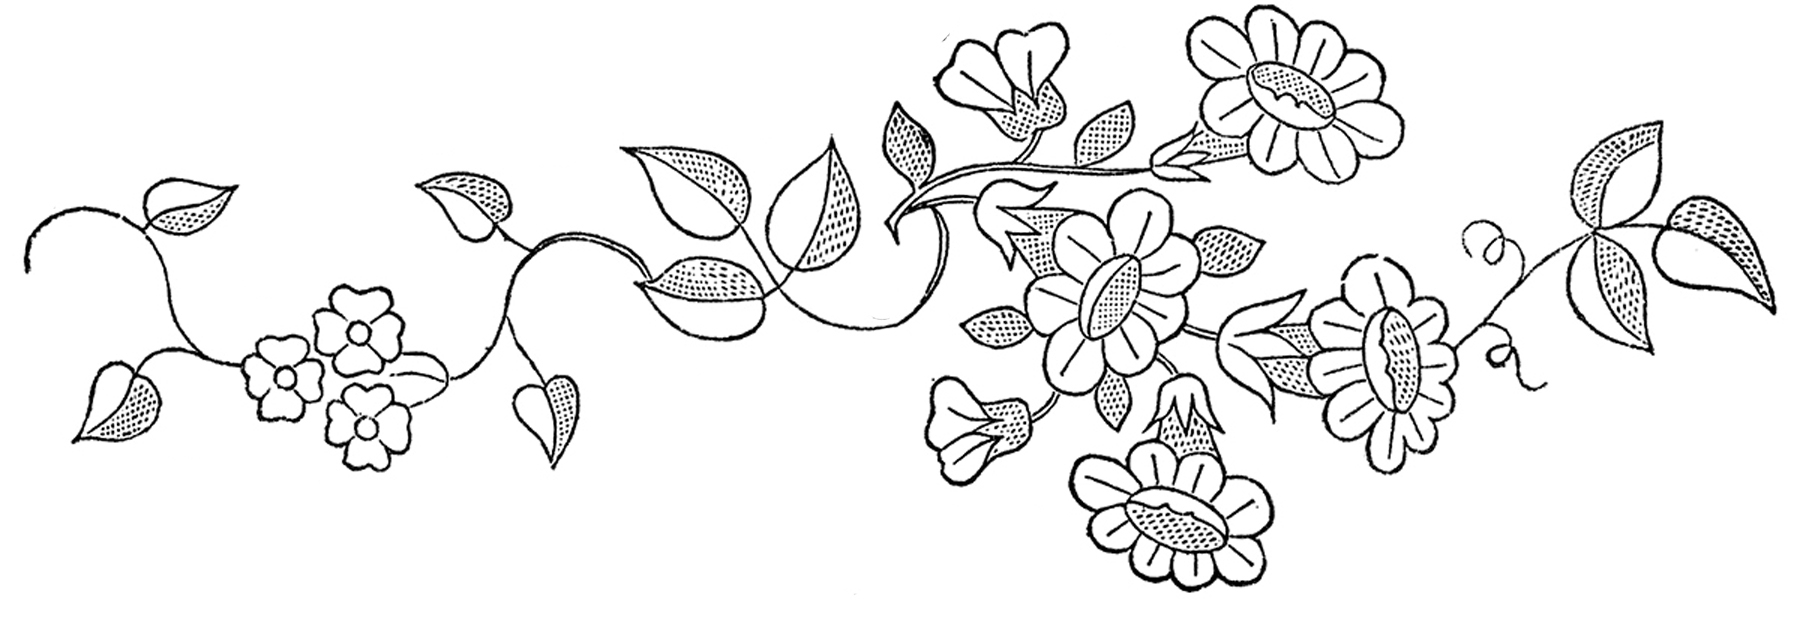 Paper Embroidery Patterns Free Hand Embroidery Patterns Digitemb